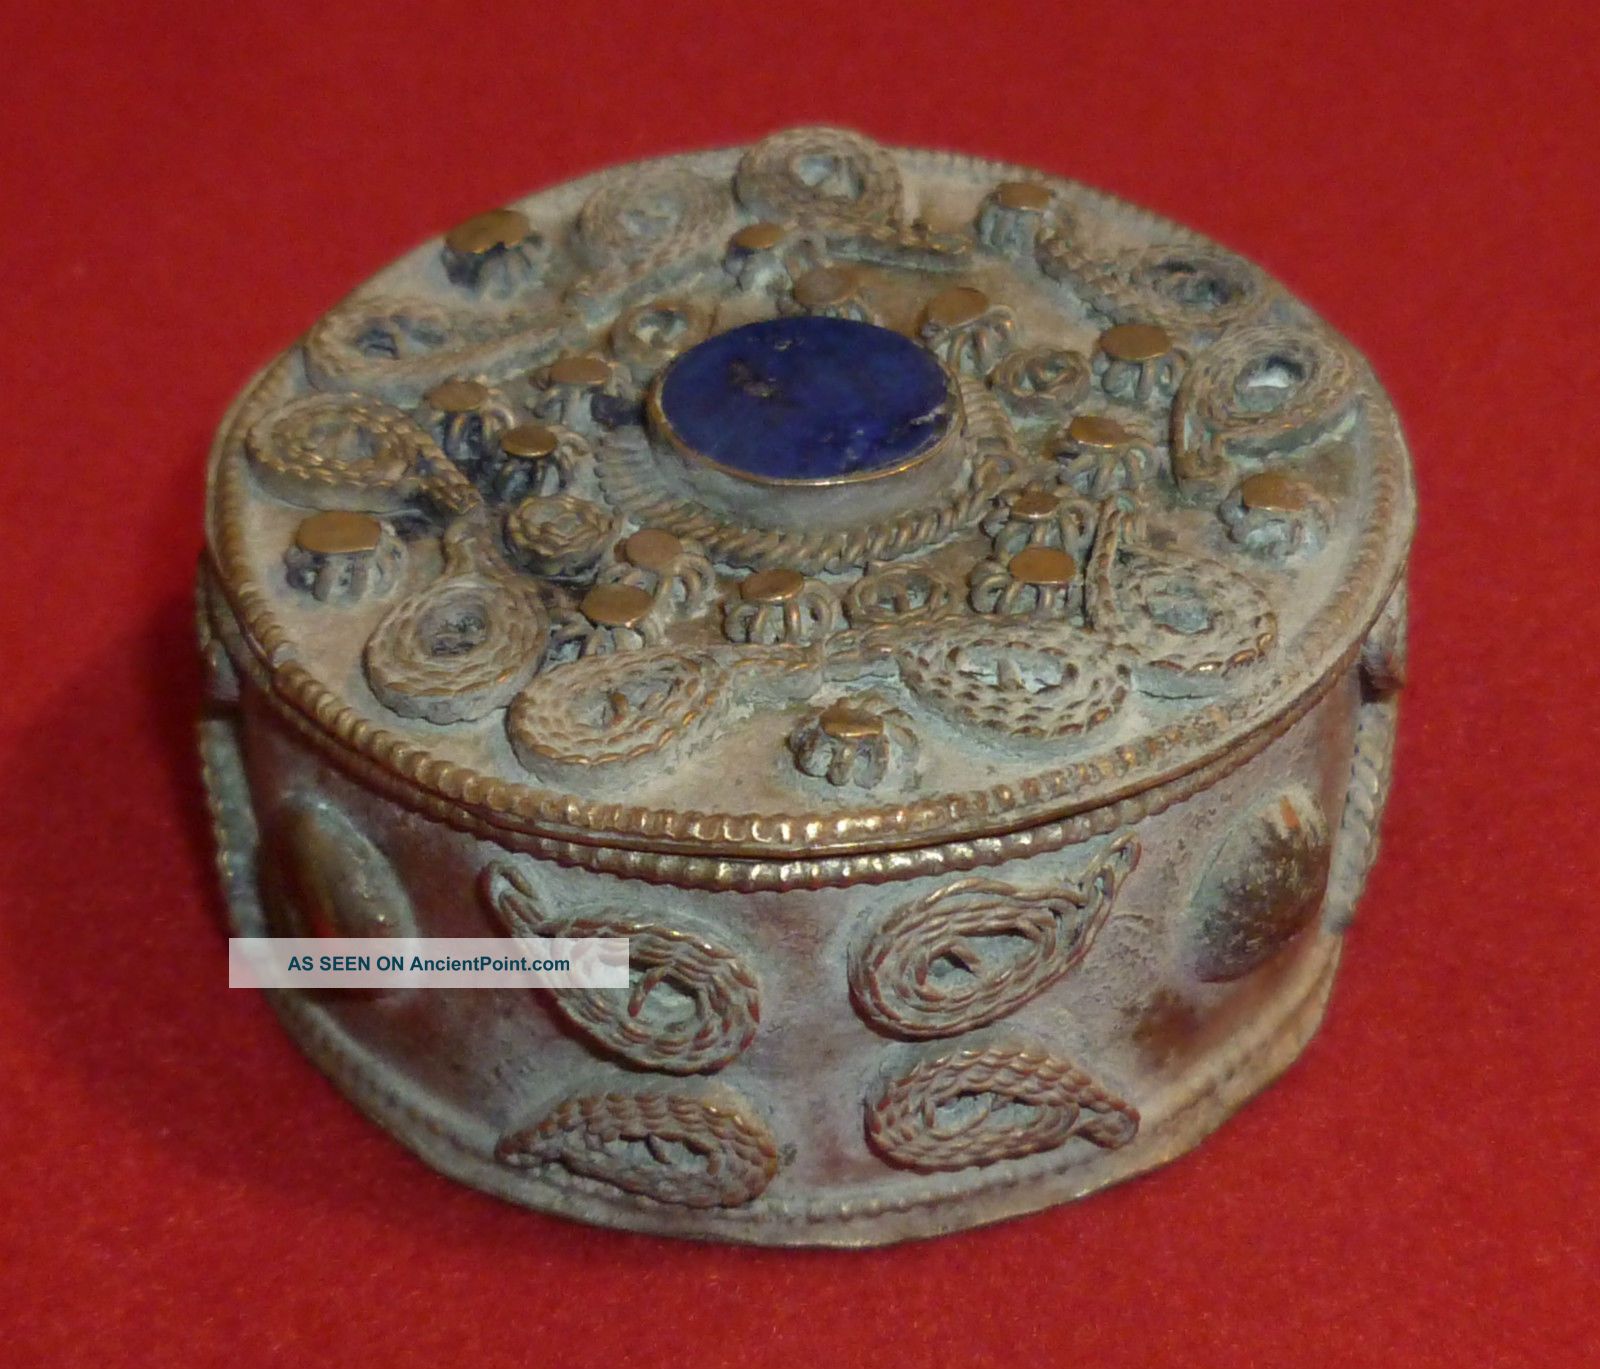 Byzantine Silver Or Silver Plated Snuff Box With Blue Stone Circa 1500 Ad - 2839 Other Antiquities photo